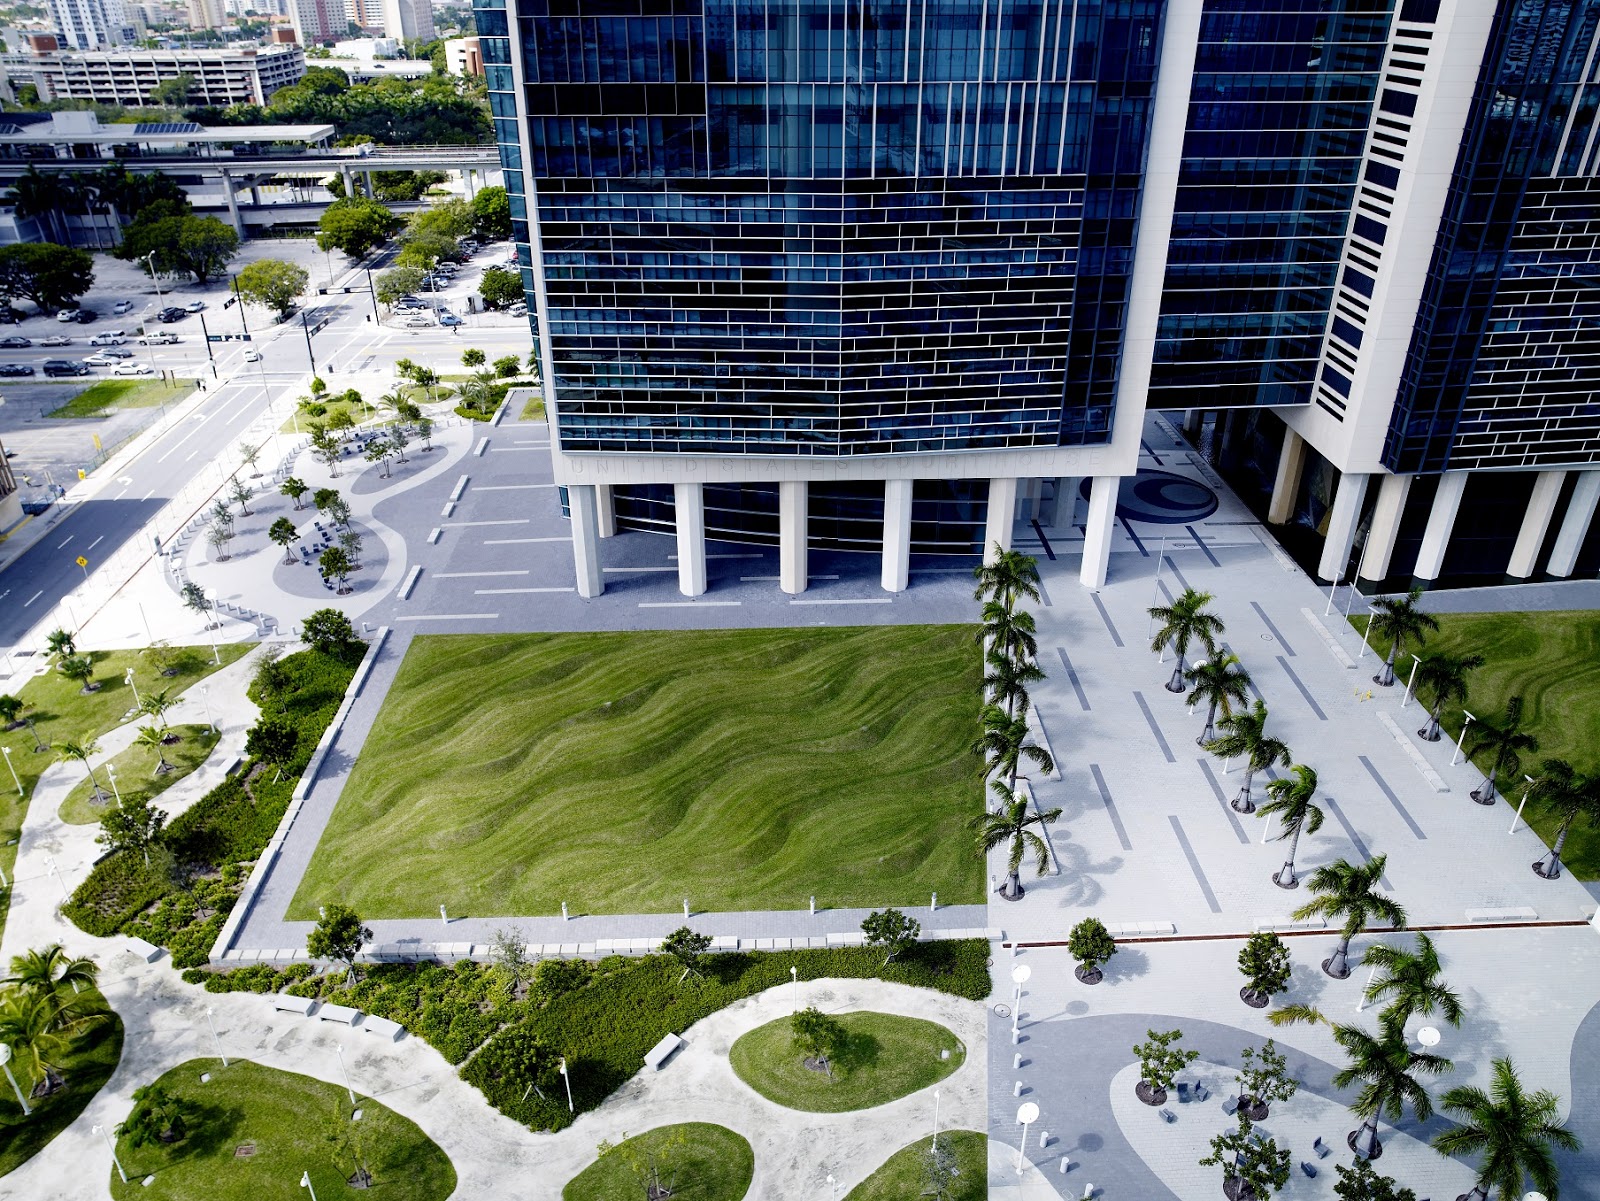 An aerial view of Flutter, by Maya Lin, that consists of a pair of sculpted lawns that mimic rippling water or sand.